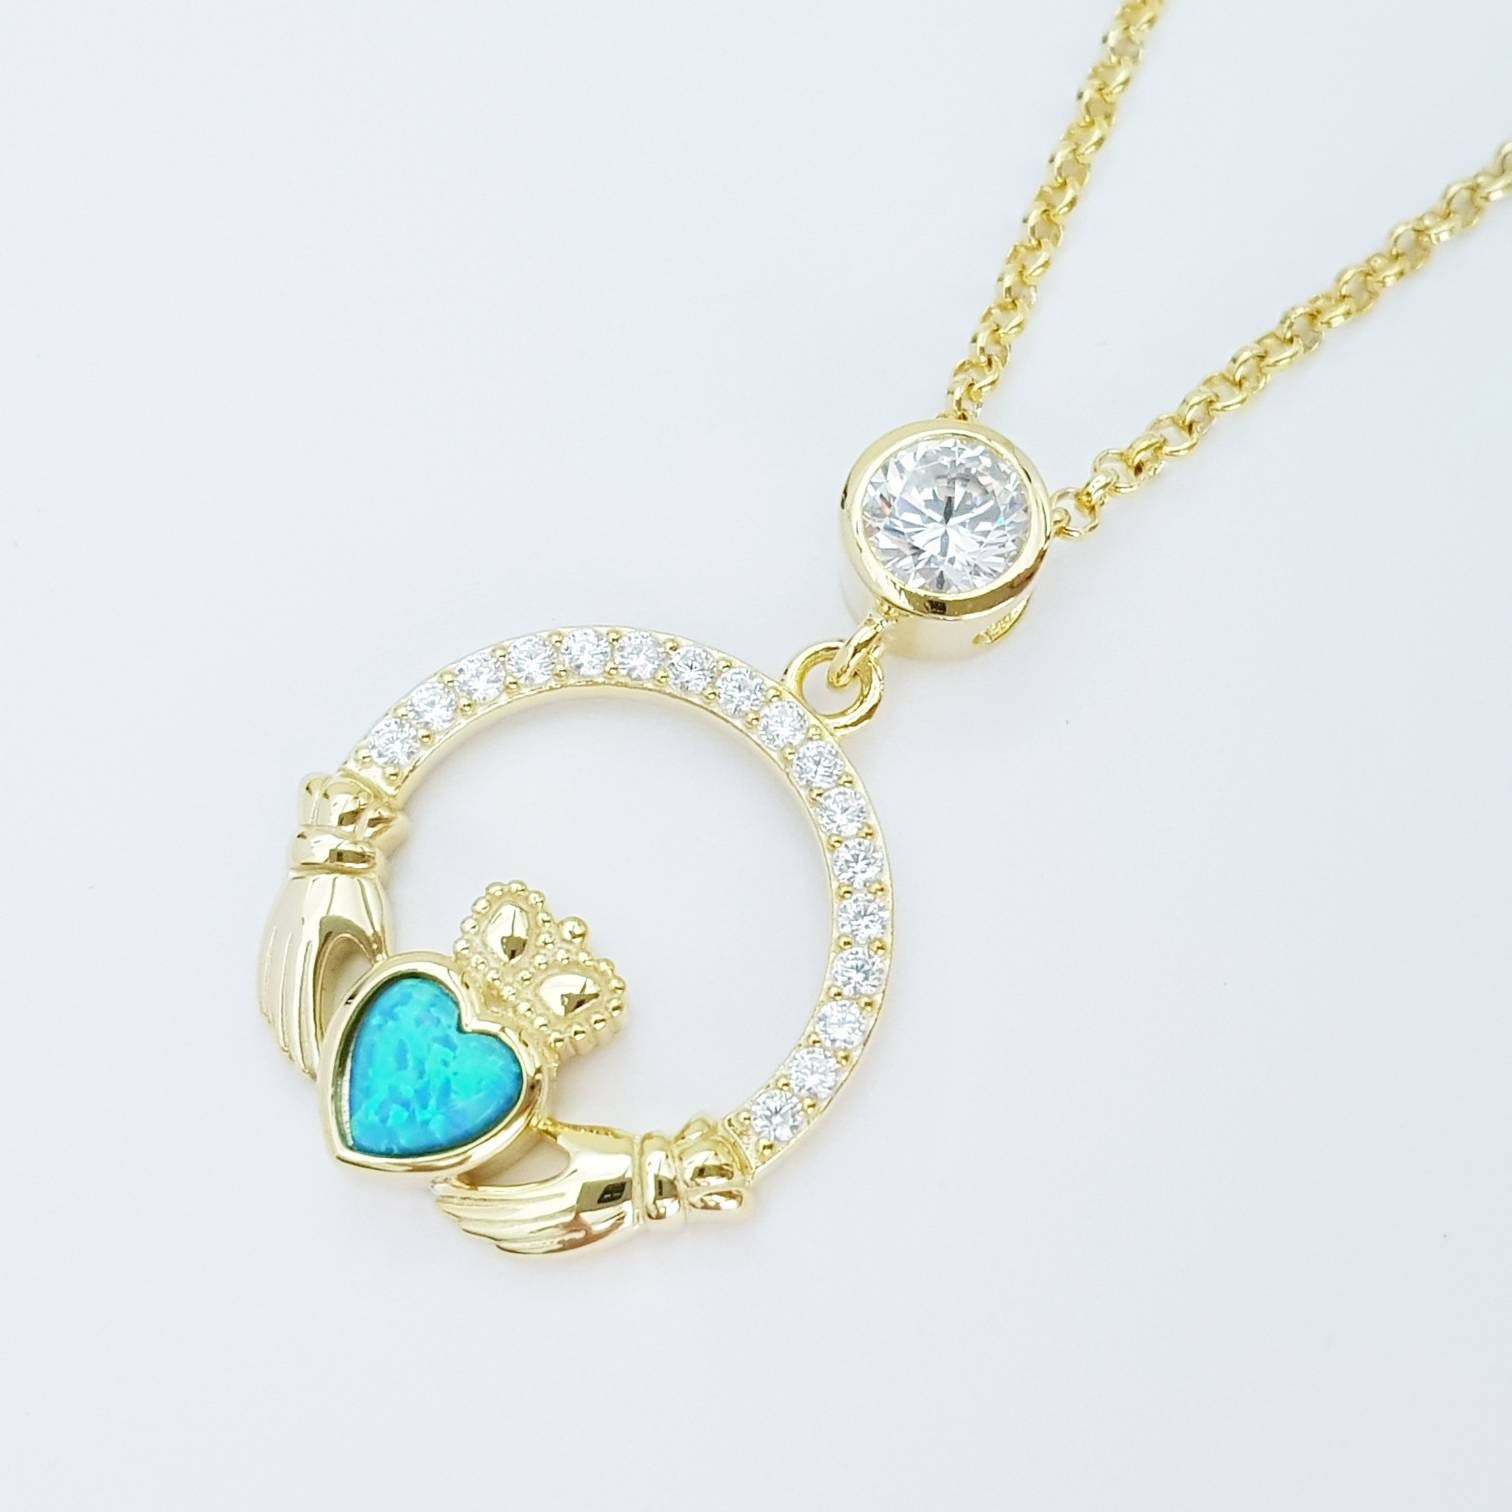 Opal Claddagh pendant, claddagh necklace, yellow gold plated claddagh pendant